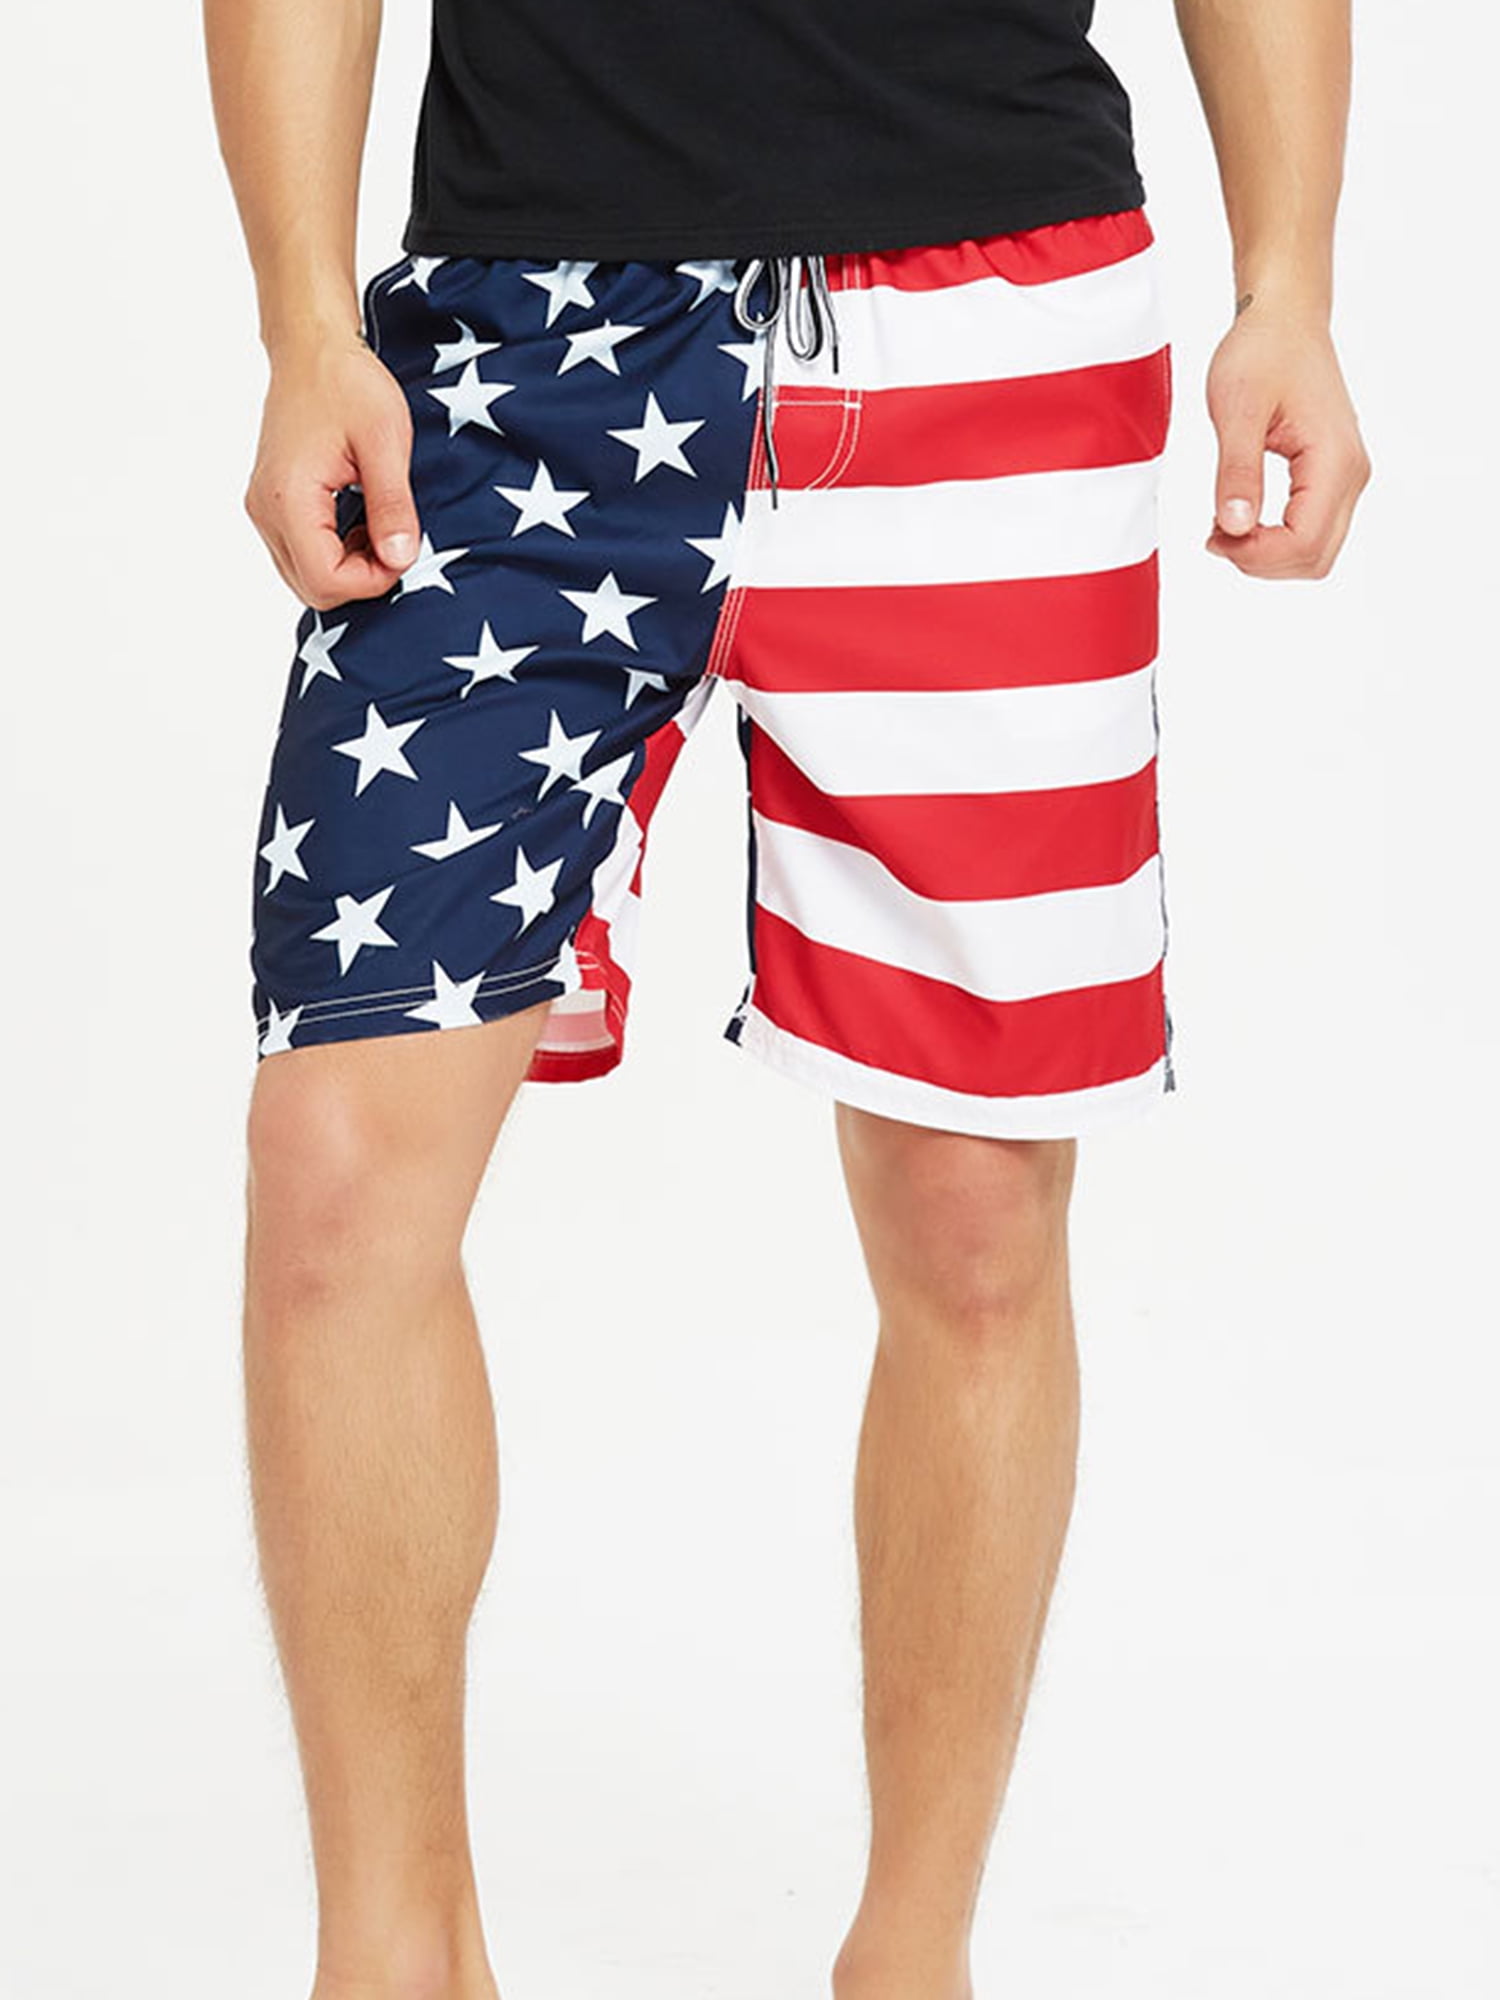 Mens Swim Trunks Kyrgyzstan Flag Eat The Earth Quick Dry Beach Board Shorts with Mesh Lining